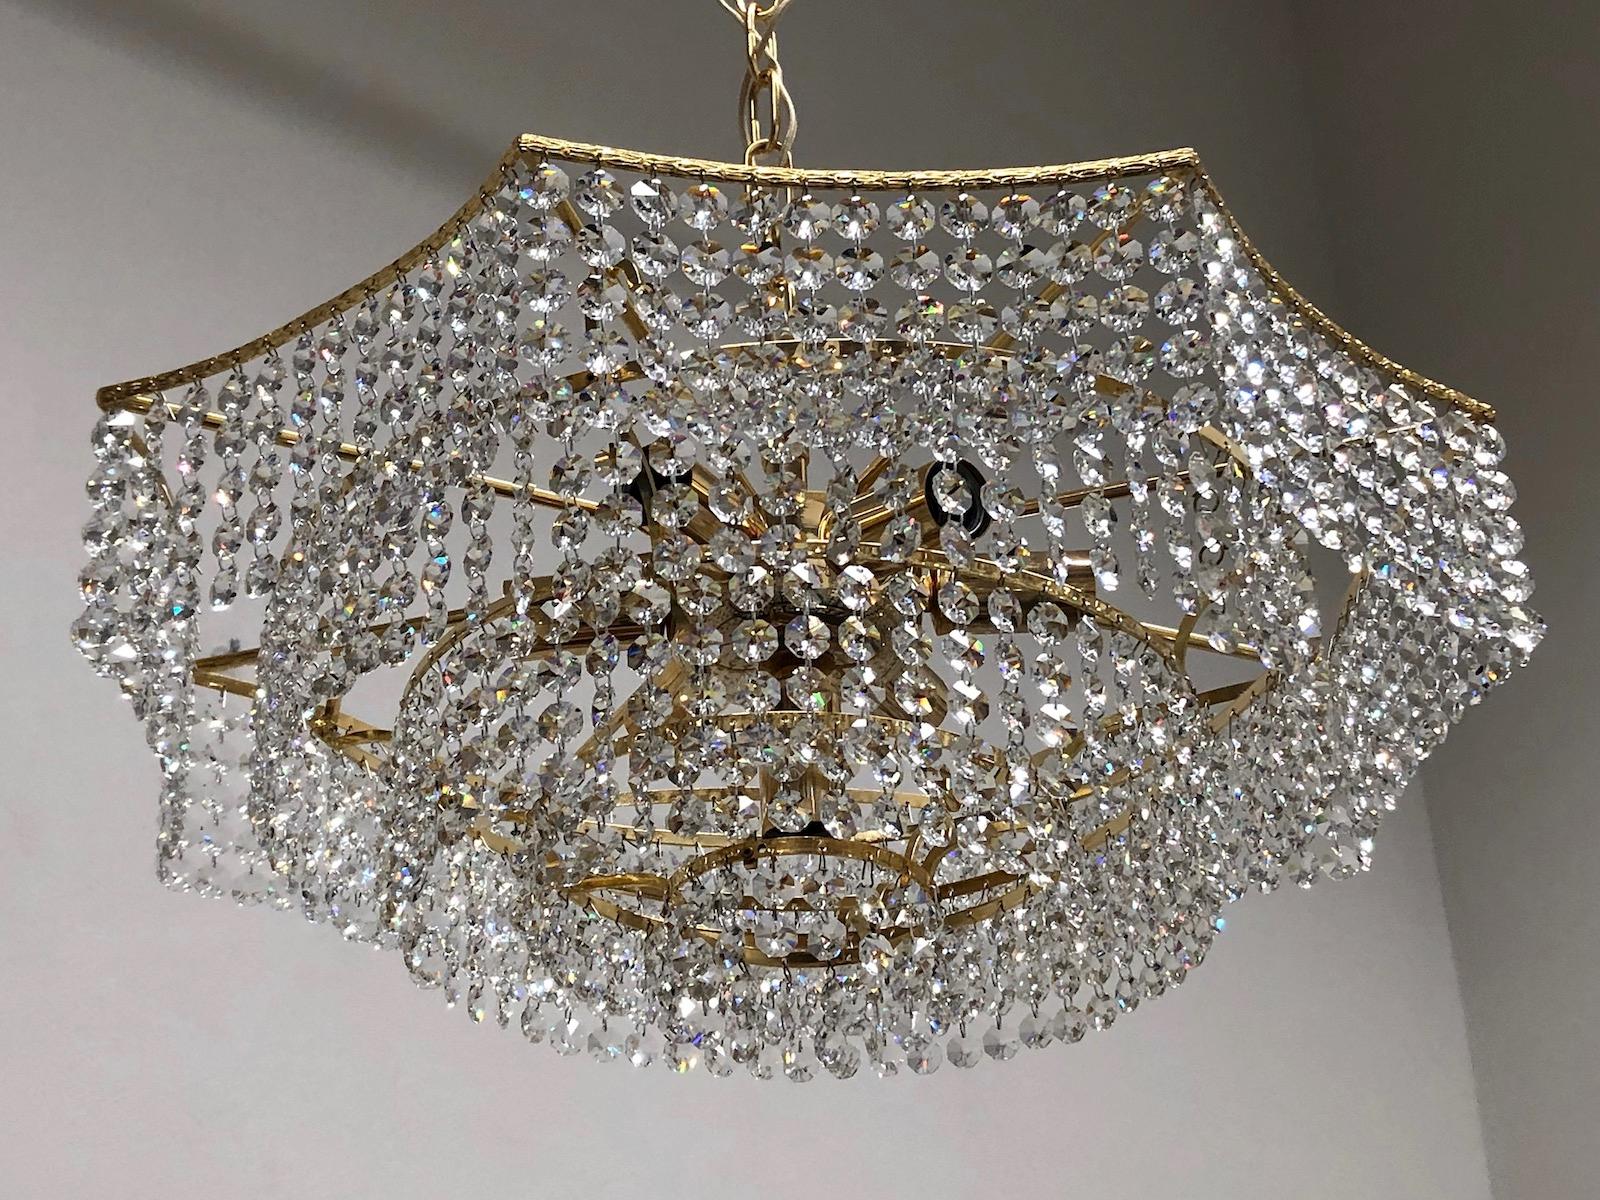 Brass and Crystal Glass Waterfall Chandelier, Richard Essig, Germany, 1960s For Sale 2